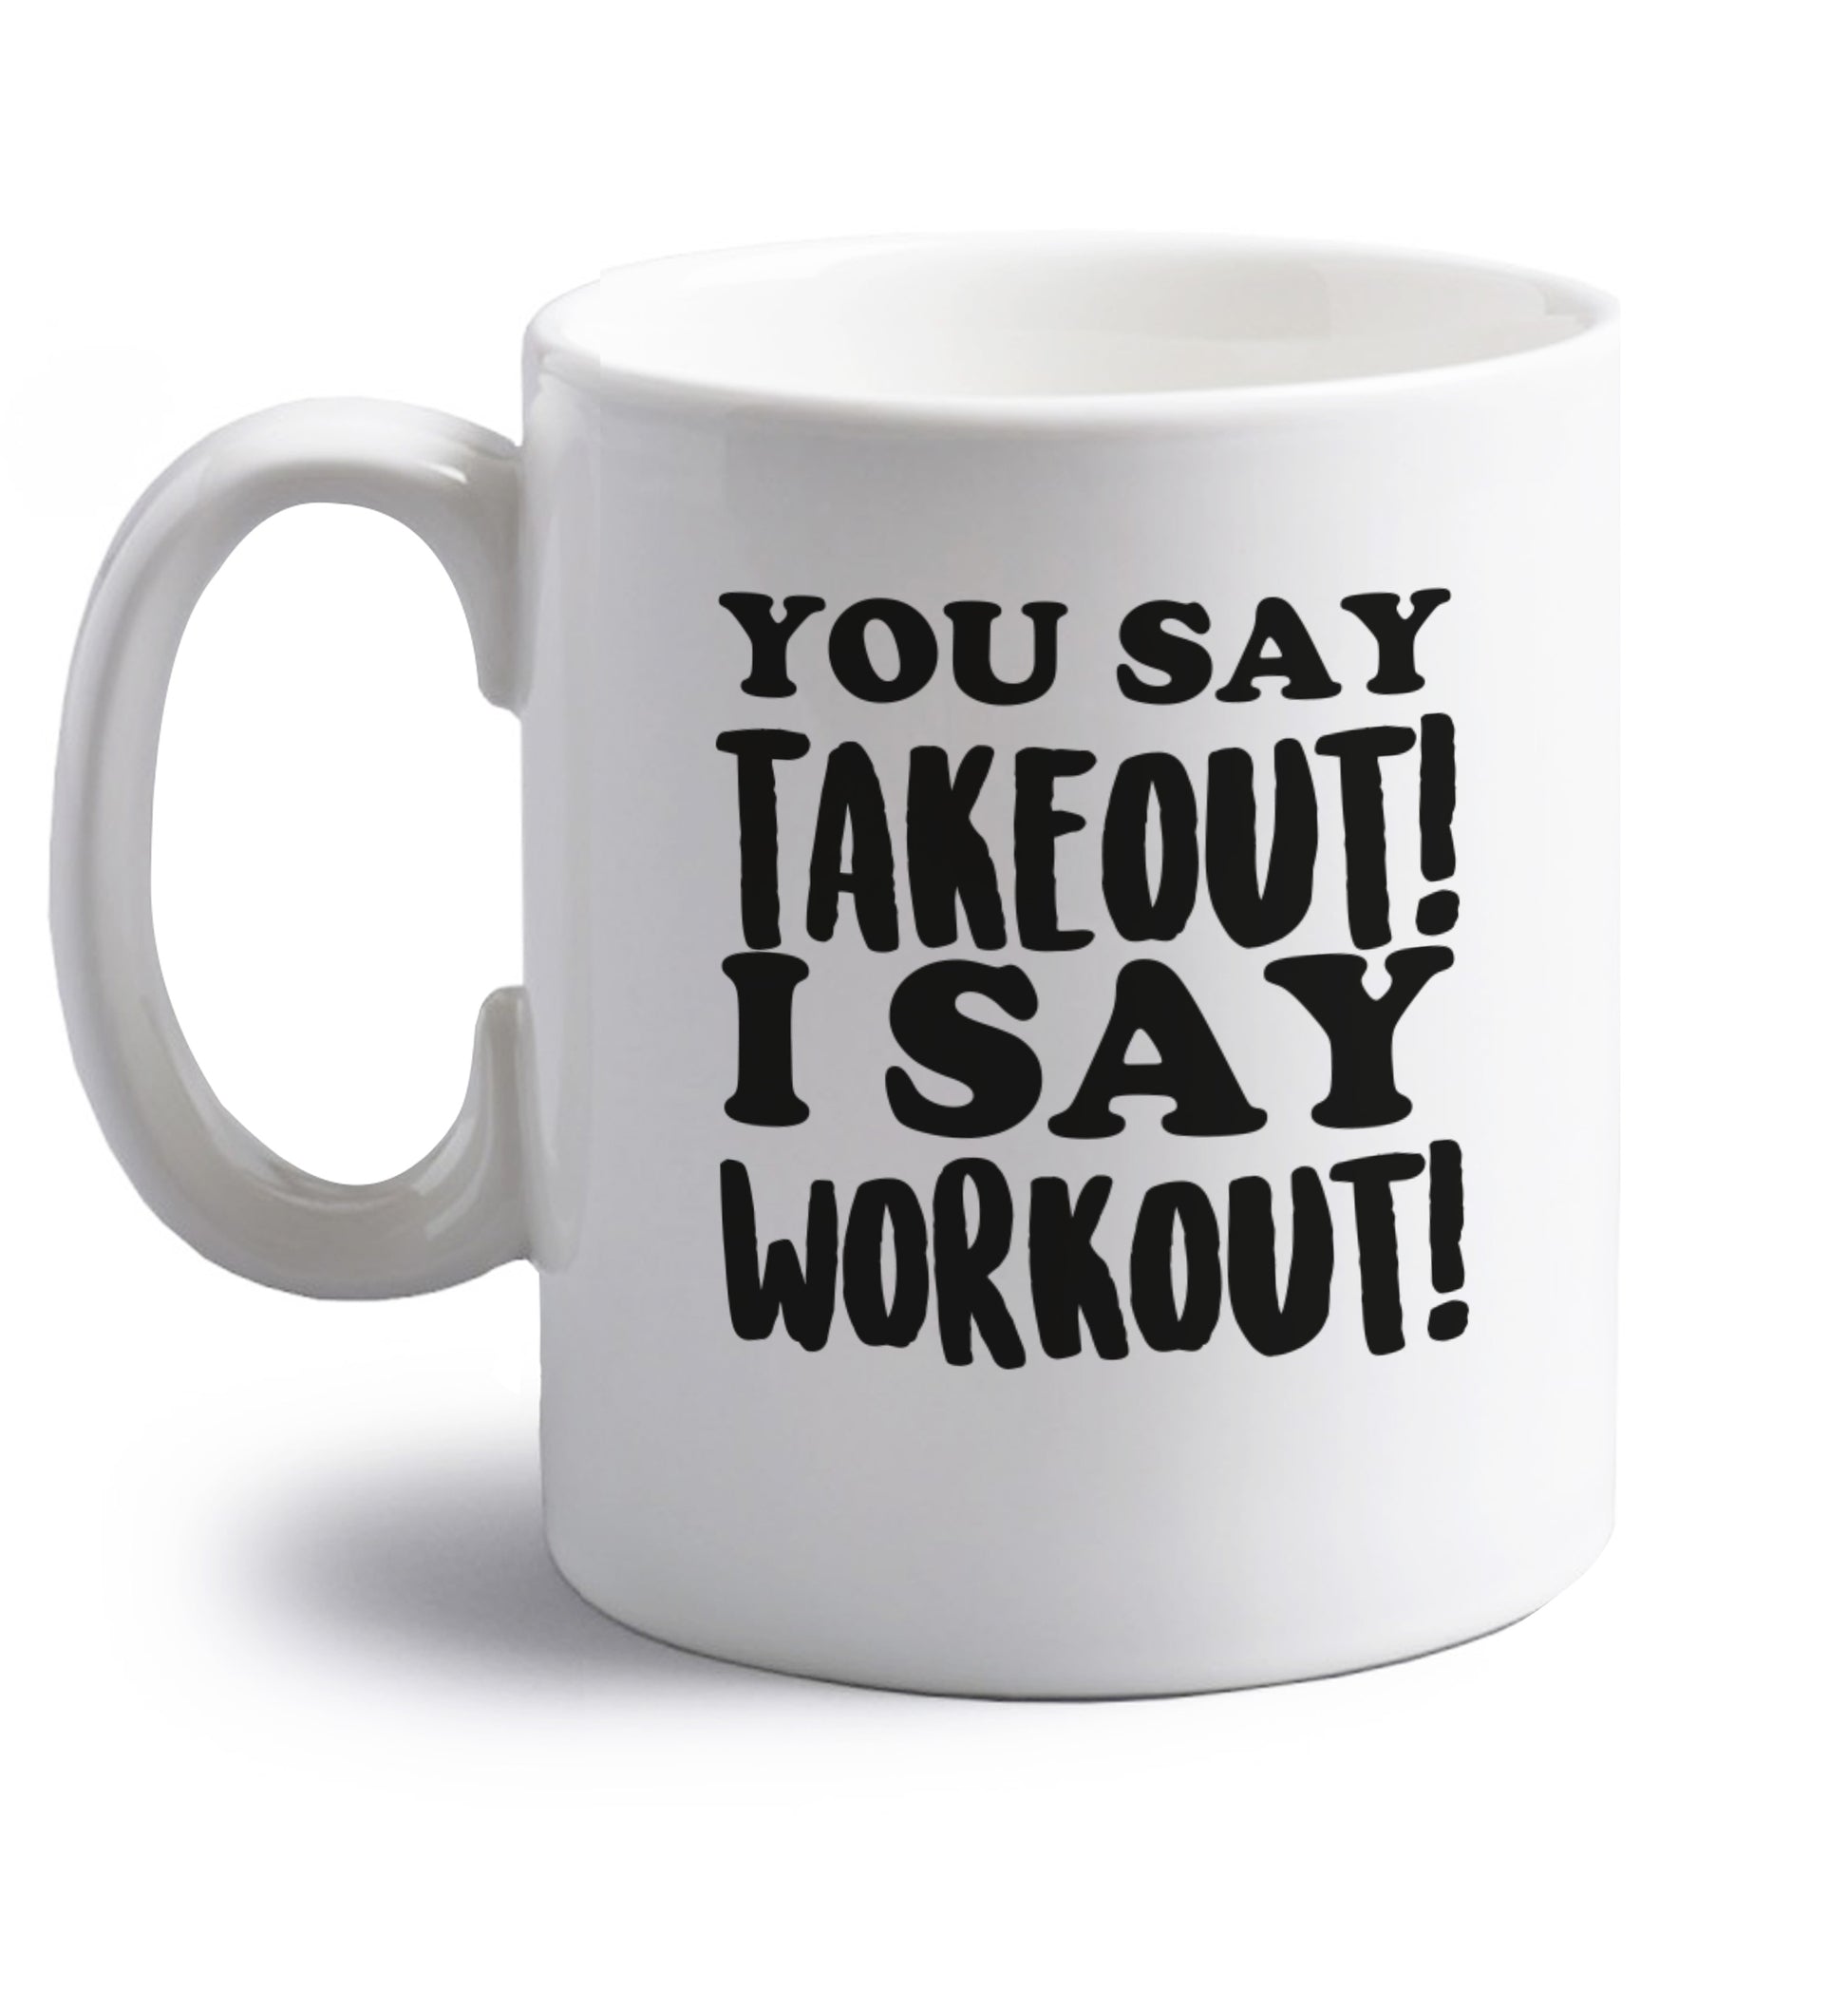 You say takeout I say workout! right handed white ceramic mug 